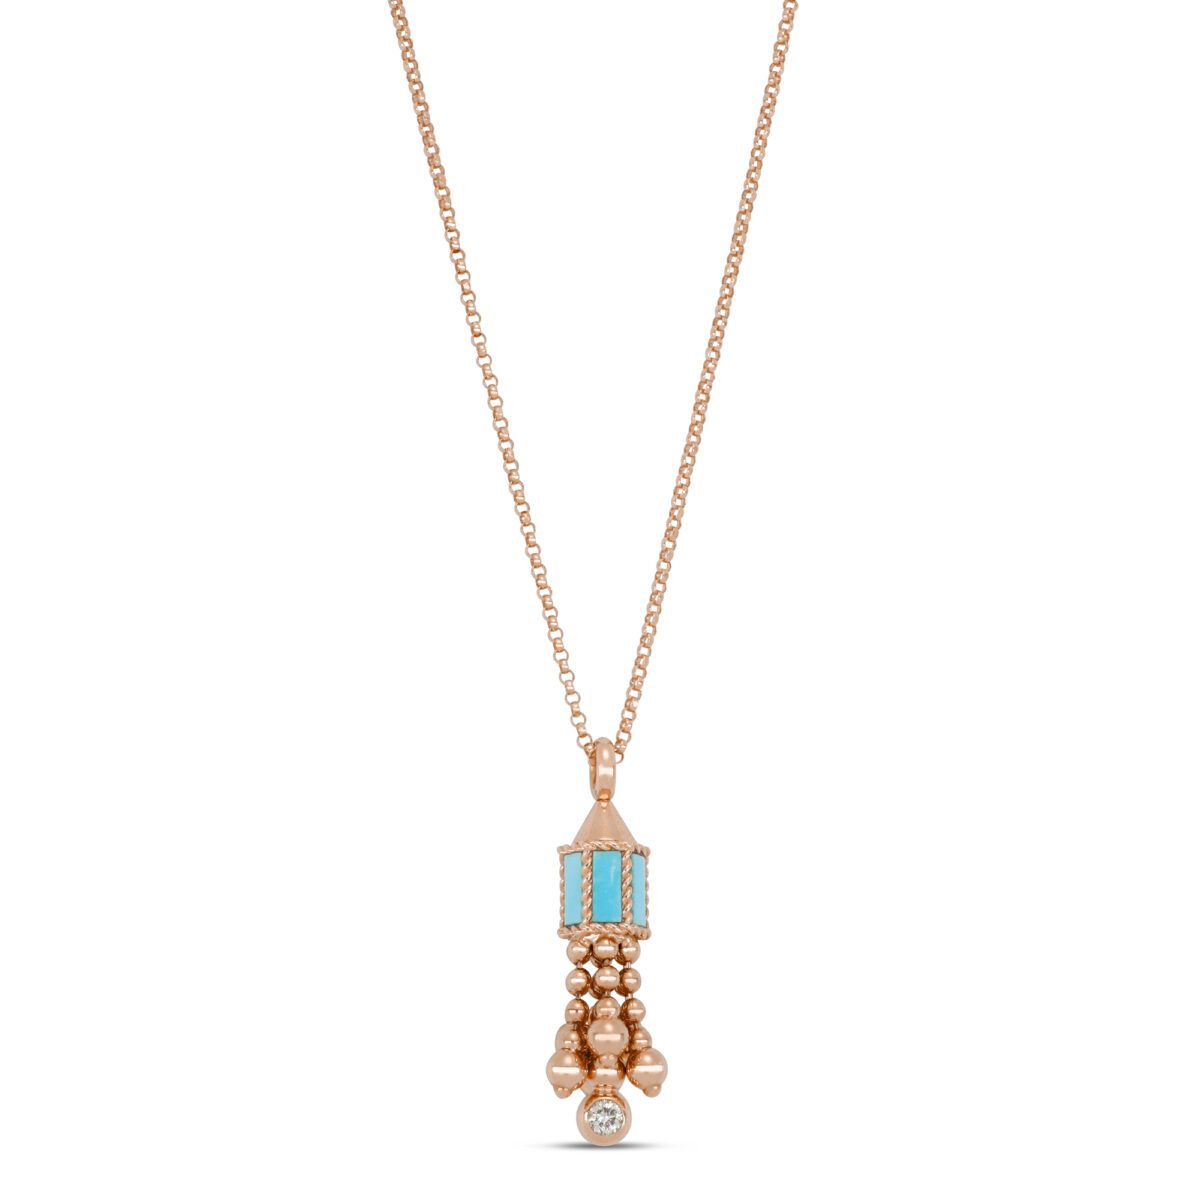 ROBERTO-COIN-ART-DECO-TASSEL-NECKLACE-18KT-ROSE-GOLD-WITH-TURQUOISE-AND-DIAMONDS-MINI-VERSION_ADV888CL2267_03